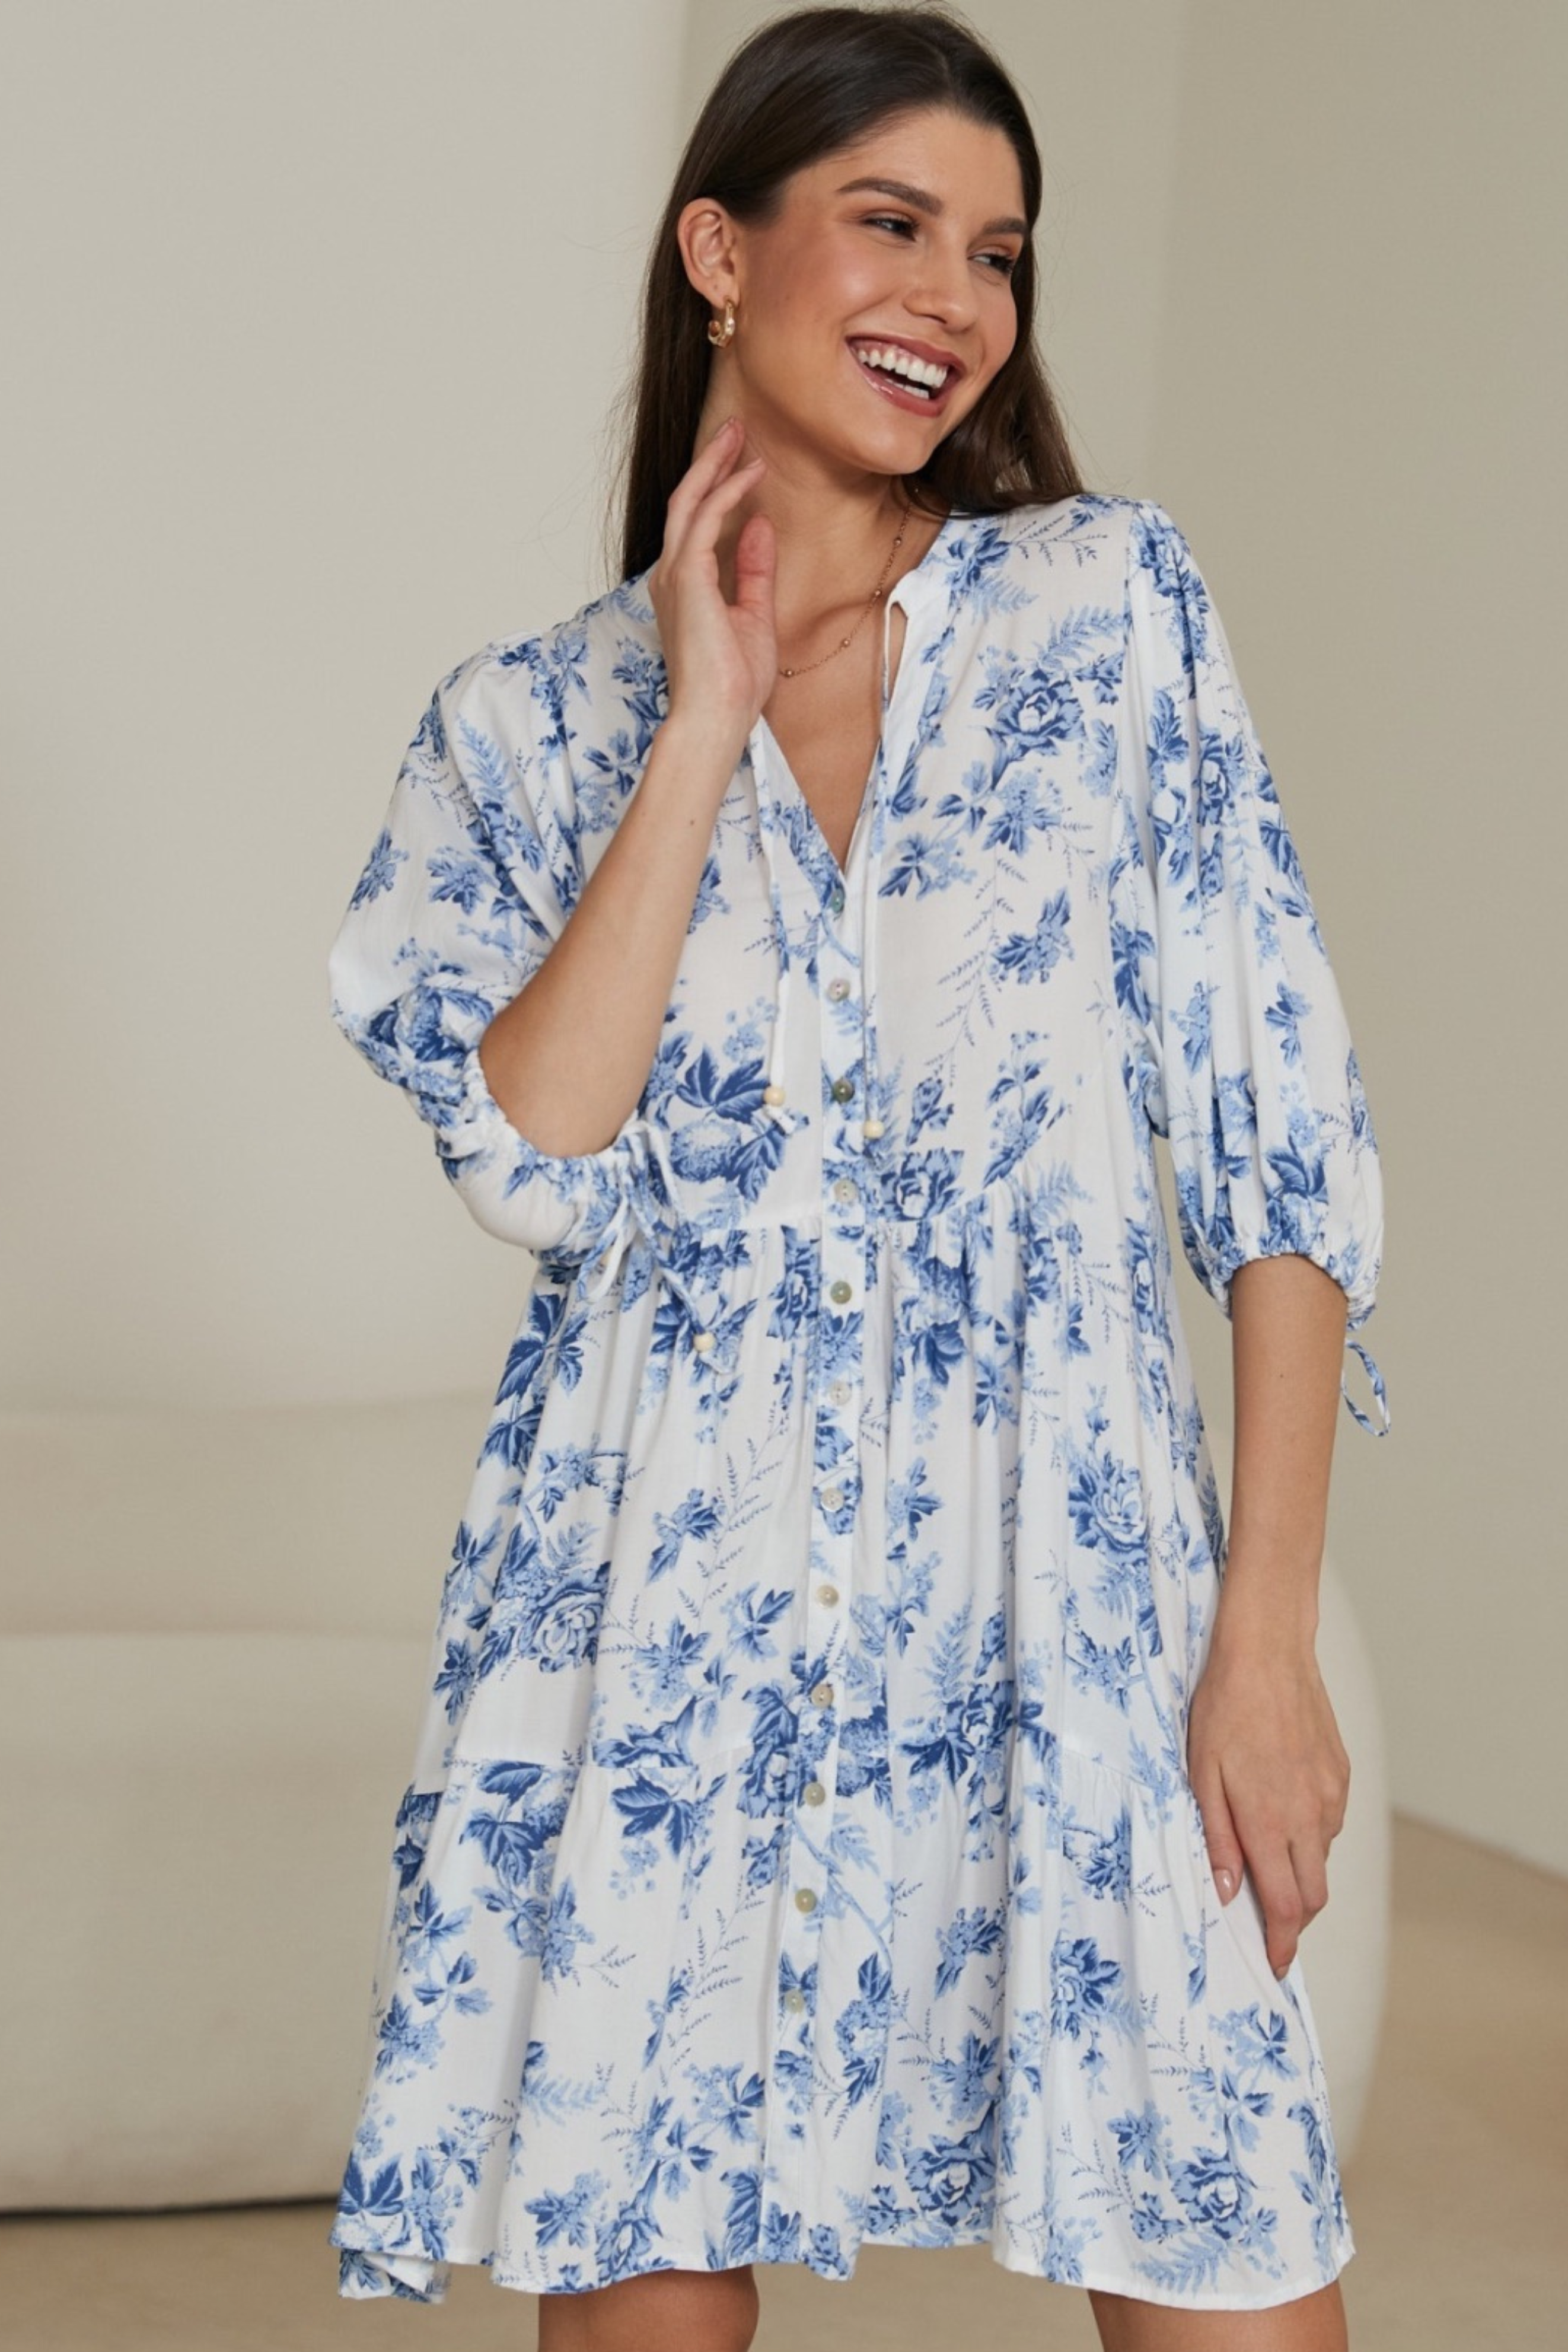 MARNI Dress in White and Blue Floral